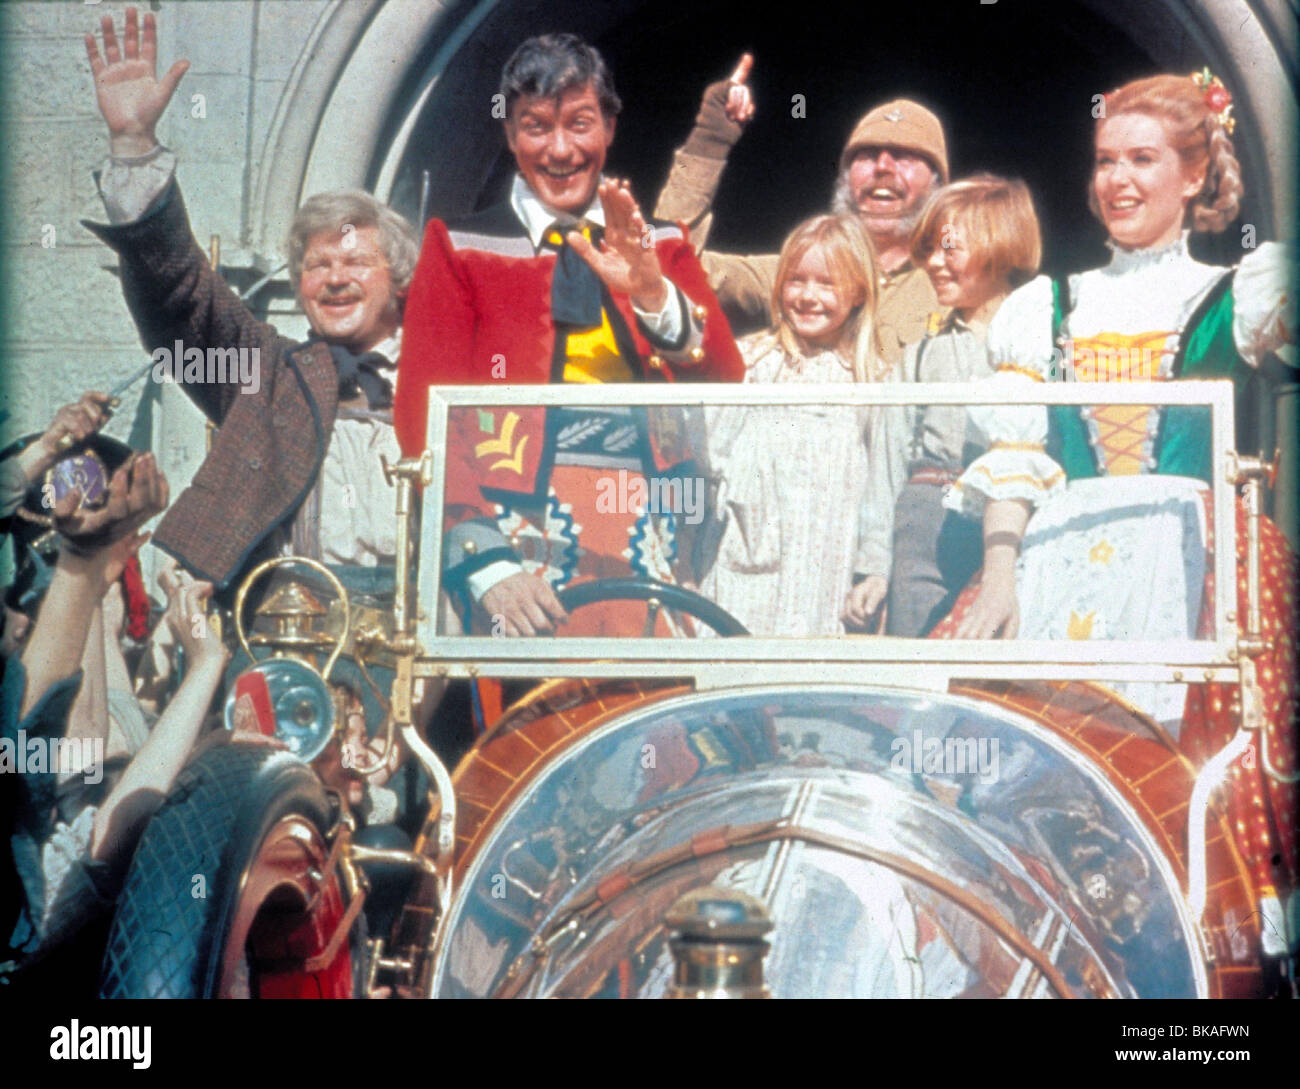 CHITTY CHITTY BANG BANG (1968) BENNY HILL, DICK VAN DYKE, HEATHER RIPLEY,  LIONEL JEFFRIES, ADRIAN HALL, SALLY ANN HOWES CCB 053 Stock Photo - Alamy